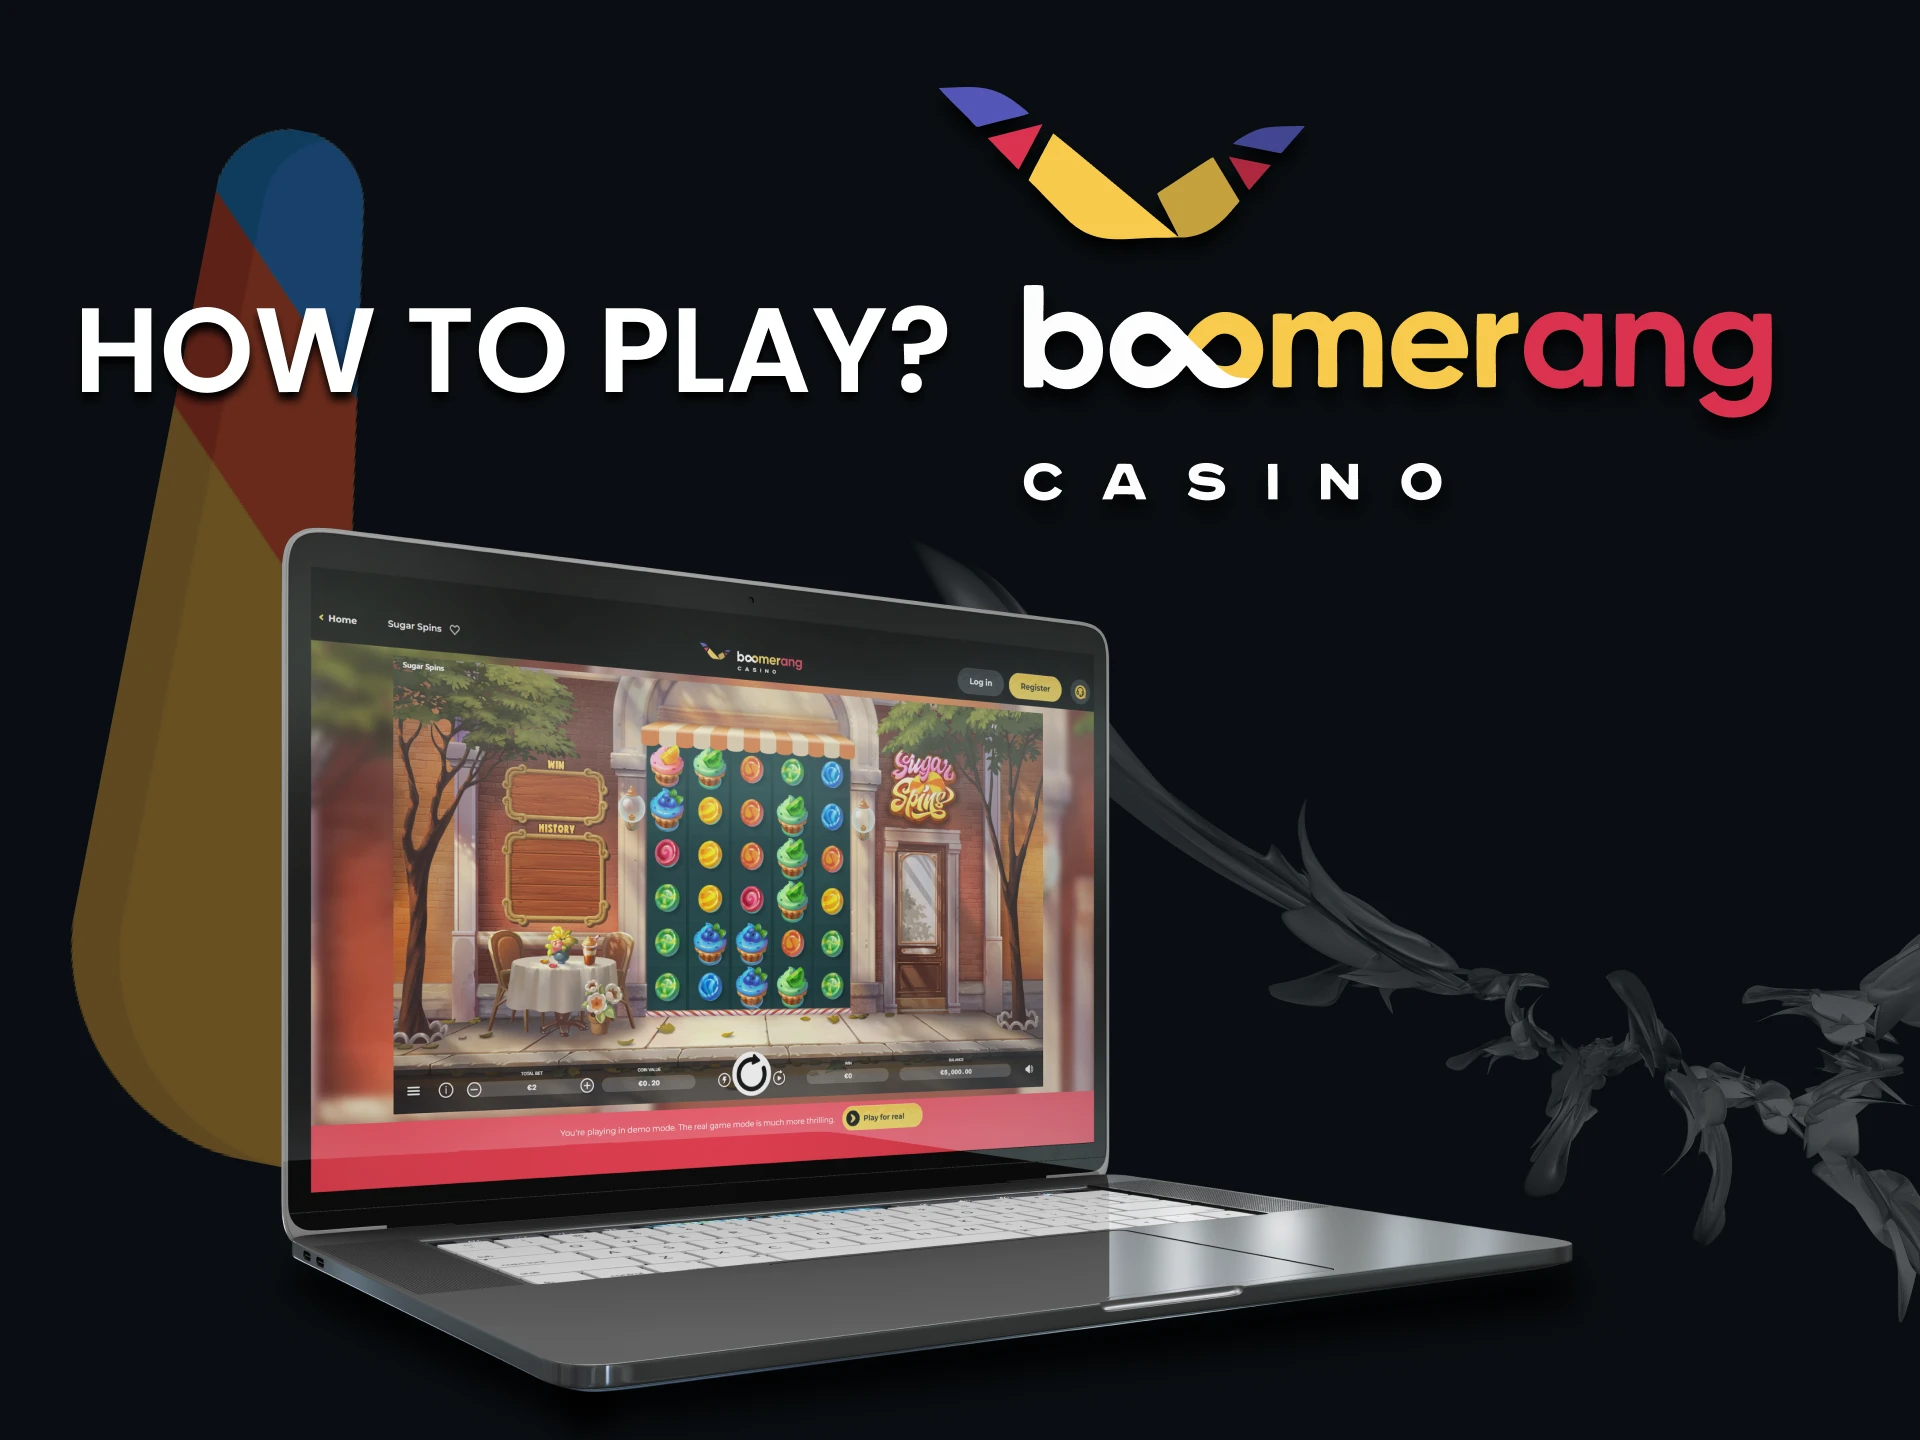 We will tell you how to start playing at Boomerang Casino.